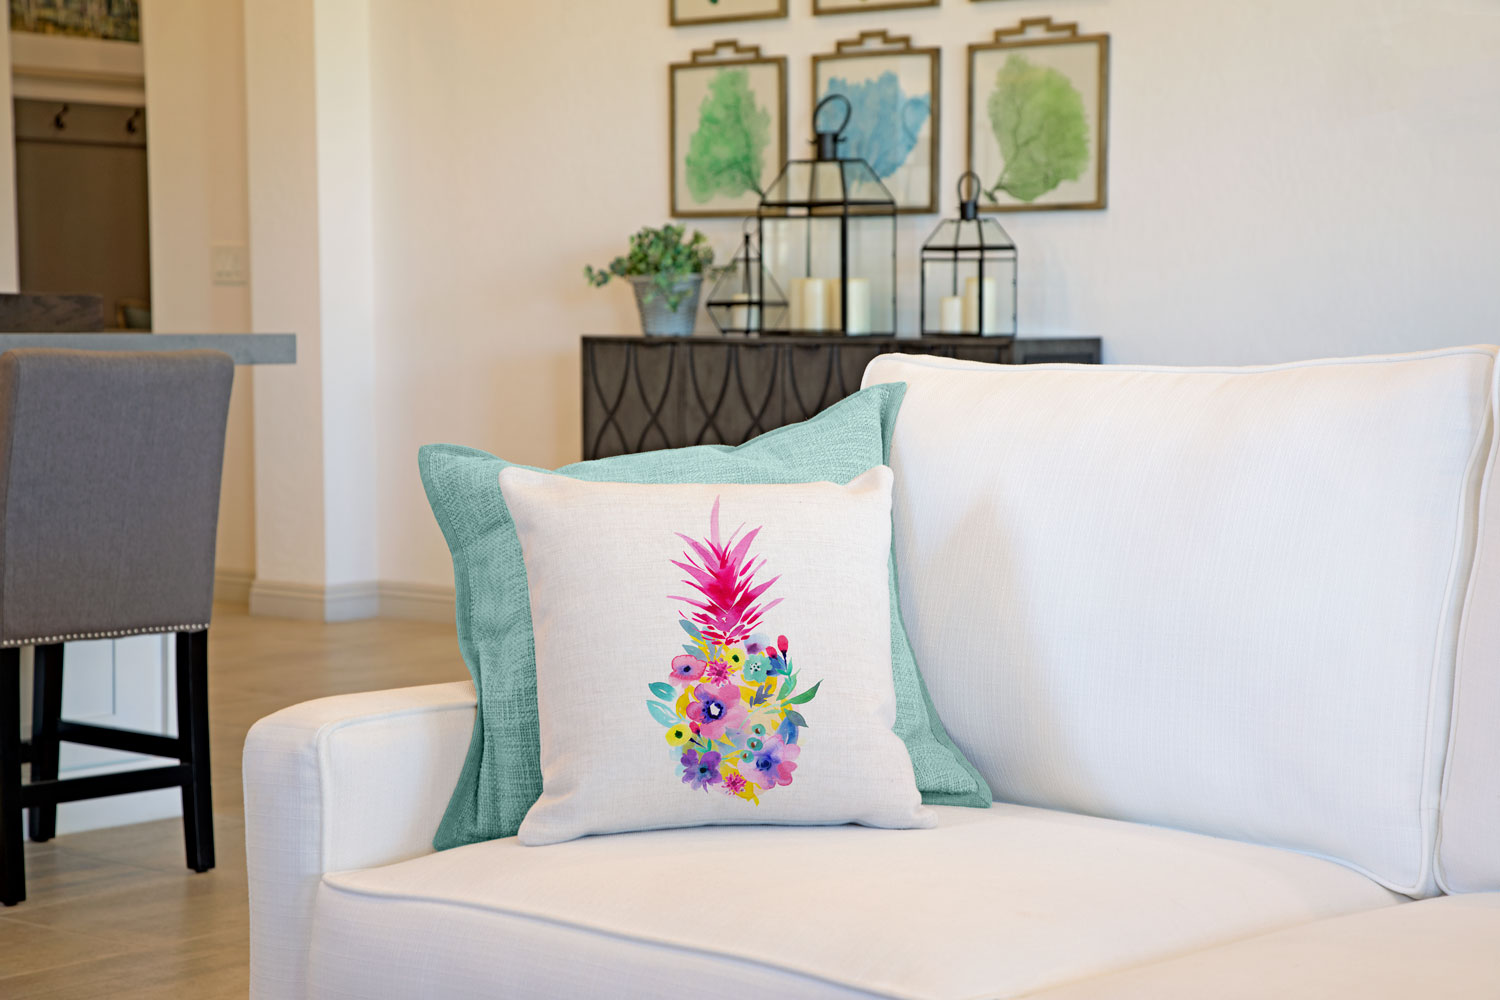 Floral Pineapple Throw Pillow Cover - Coastal Designs Throw Pillow Cover Collection-Di Lewis